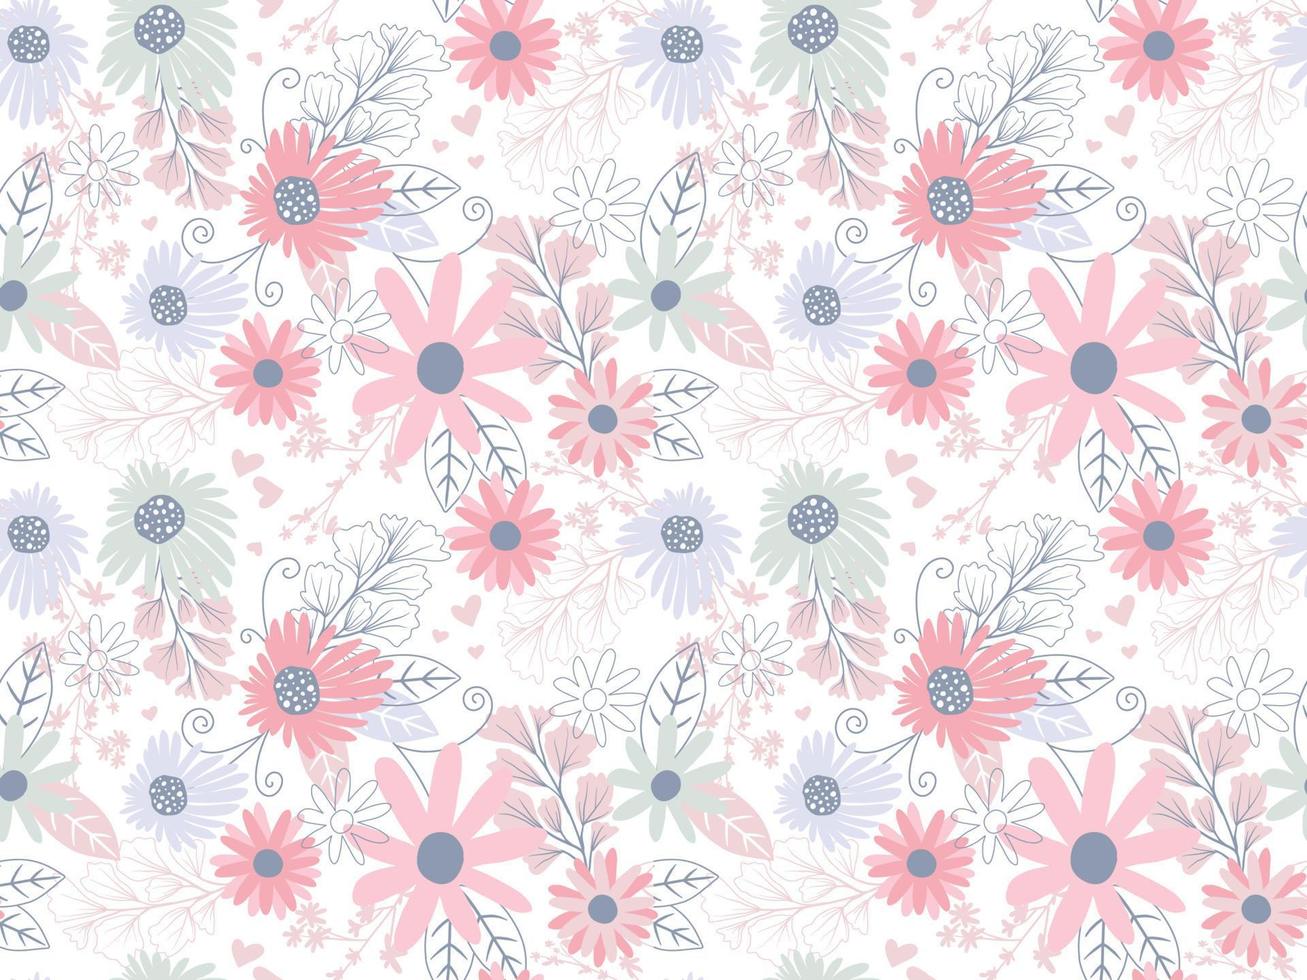 Abstract Floral seamless pattern in organic hand drawn boho style vector